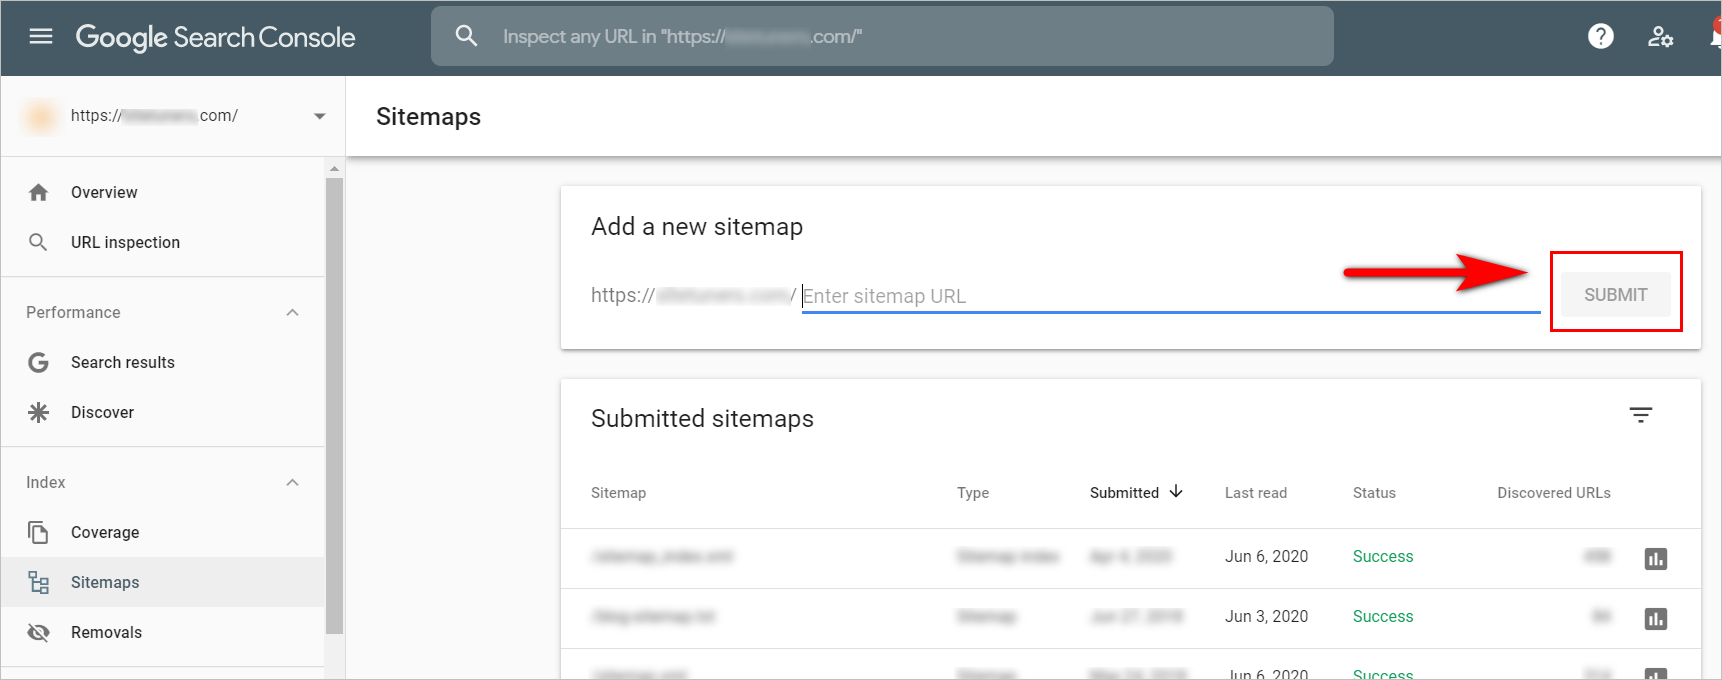 google search console basics - screenshot of the sitemaps page. it has a "add a new sitemap" area with a bar where users can put their sitemap URL. below is a "submitted sitemaps" section with a table of sitemaps, including the type, the date they were submitted, when they were last read, the status, and the number of discovered urls